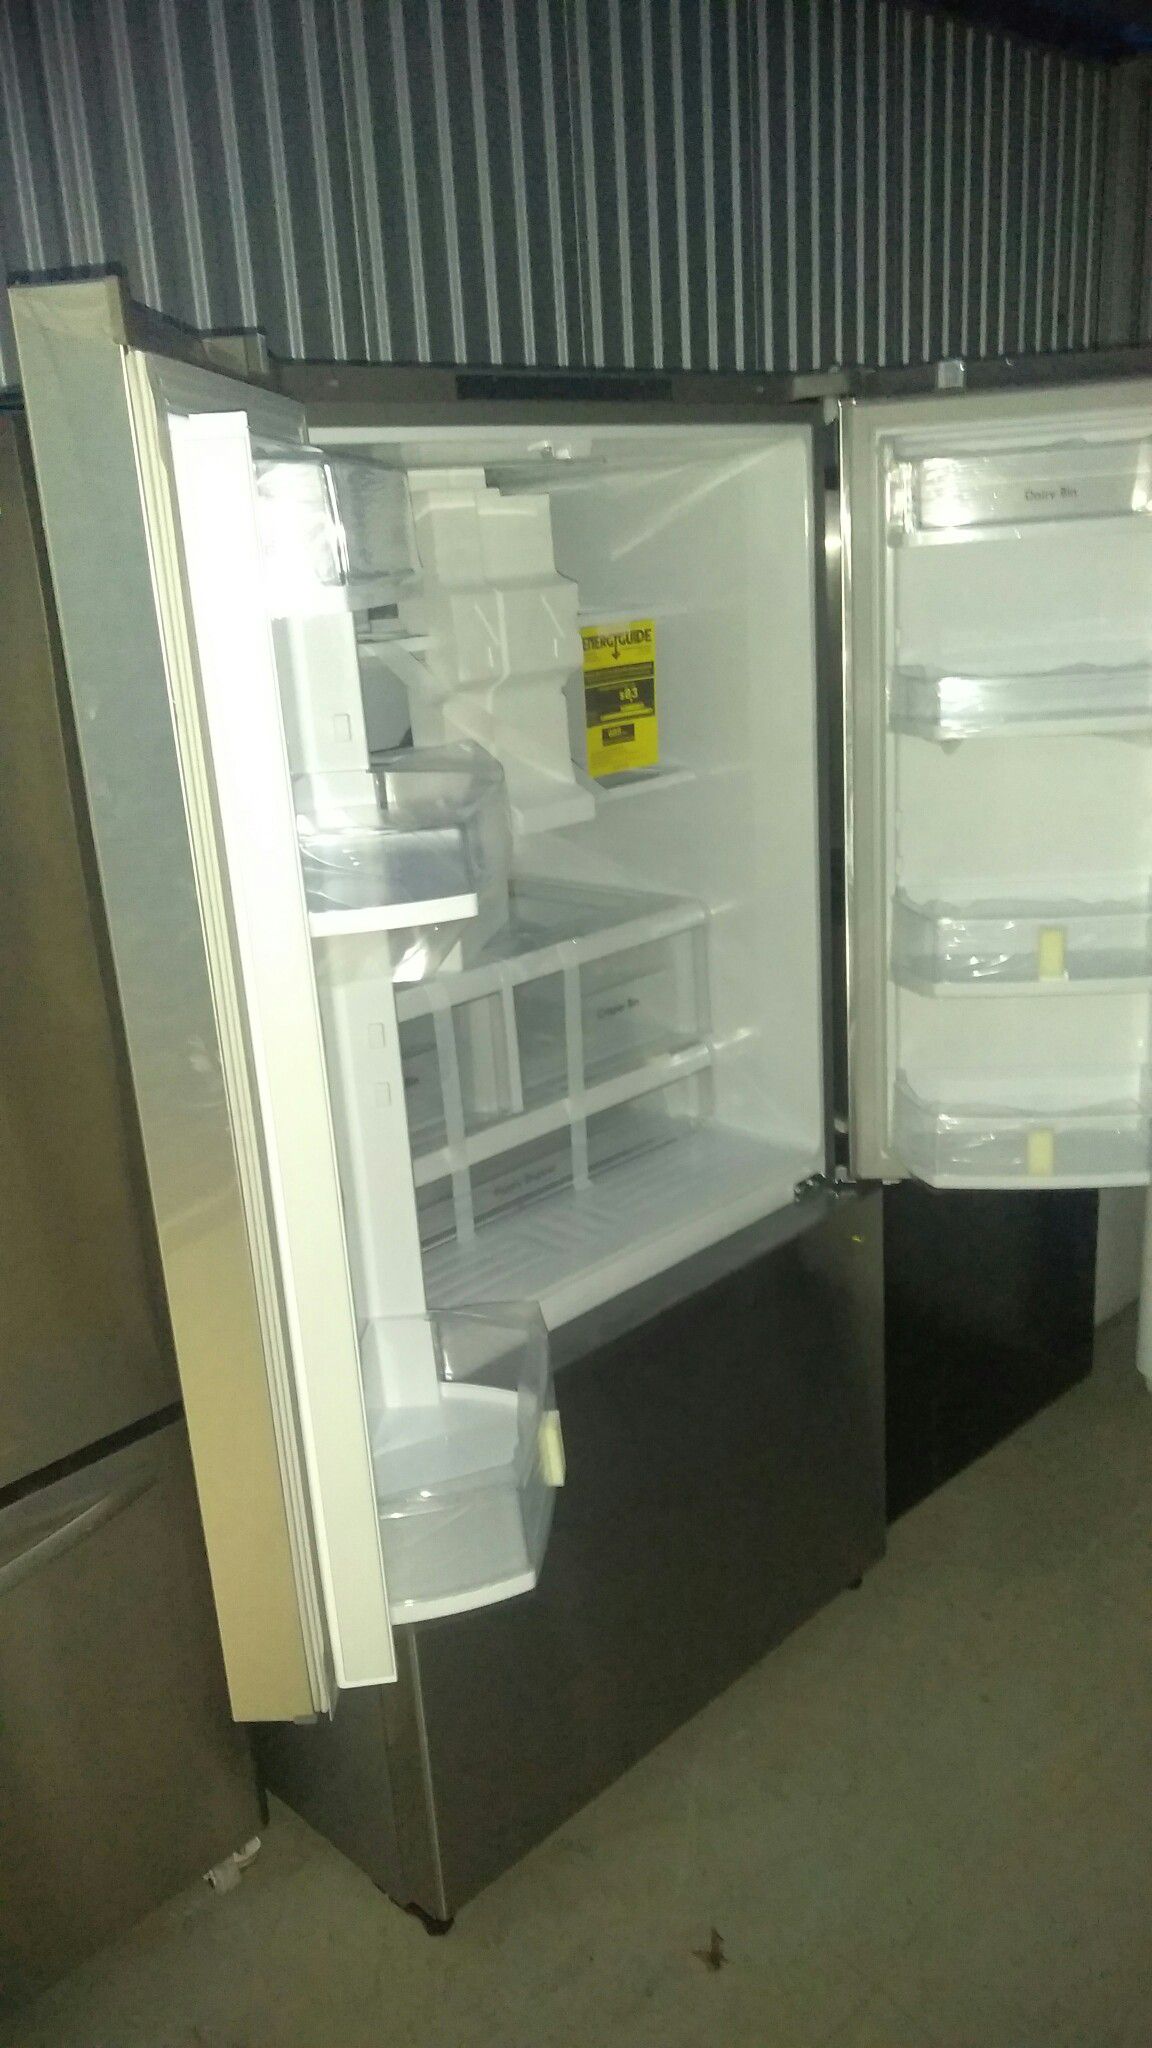 NEW" Kenmore stainless steel refrigerator